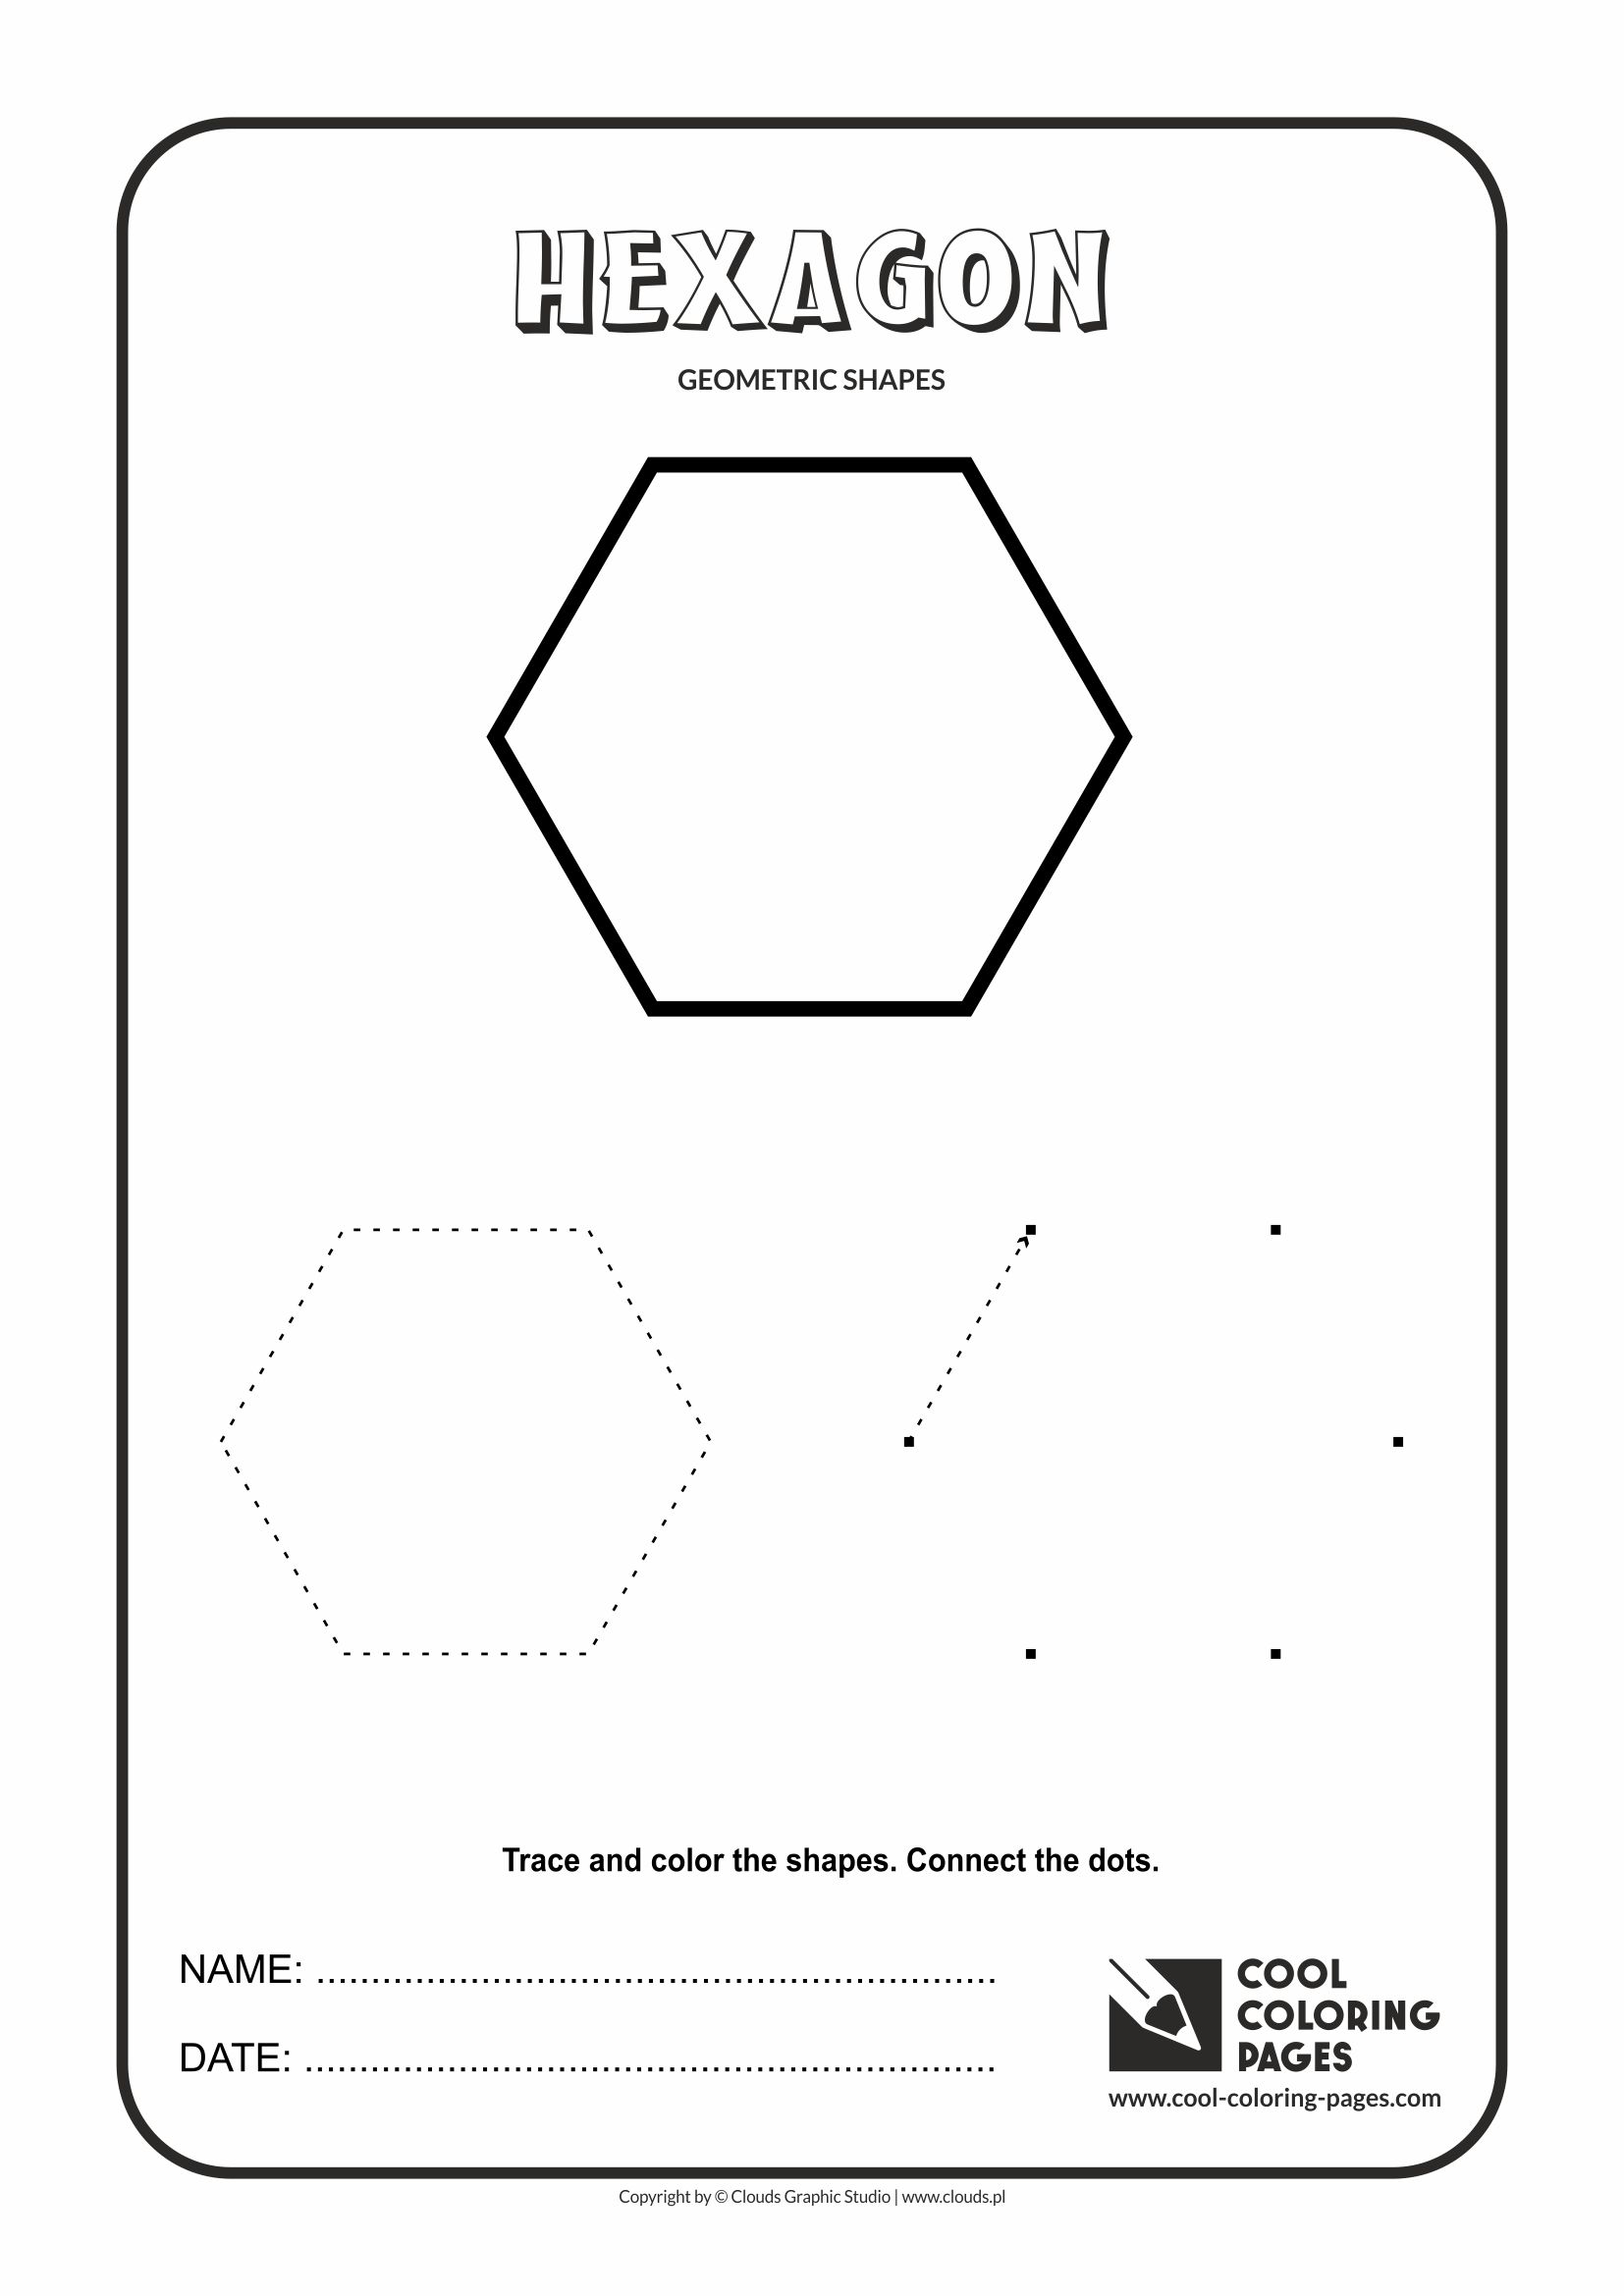 Geometric Shapes Cool Coloring Pages Hexagon Shape Kindergarten